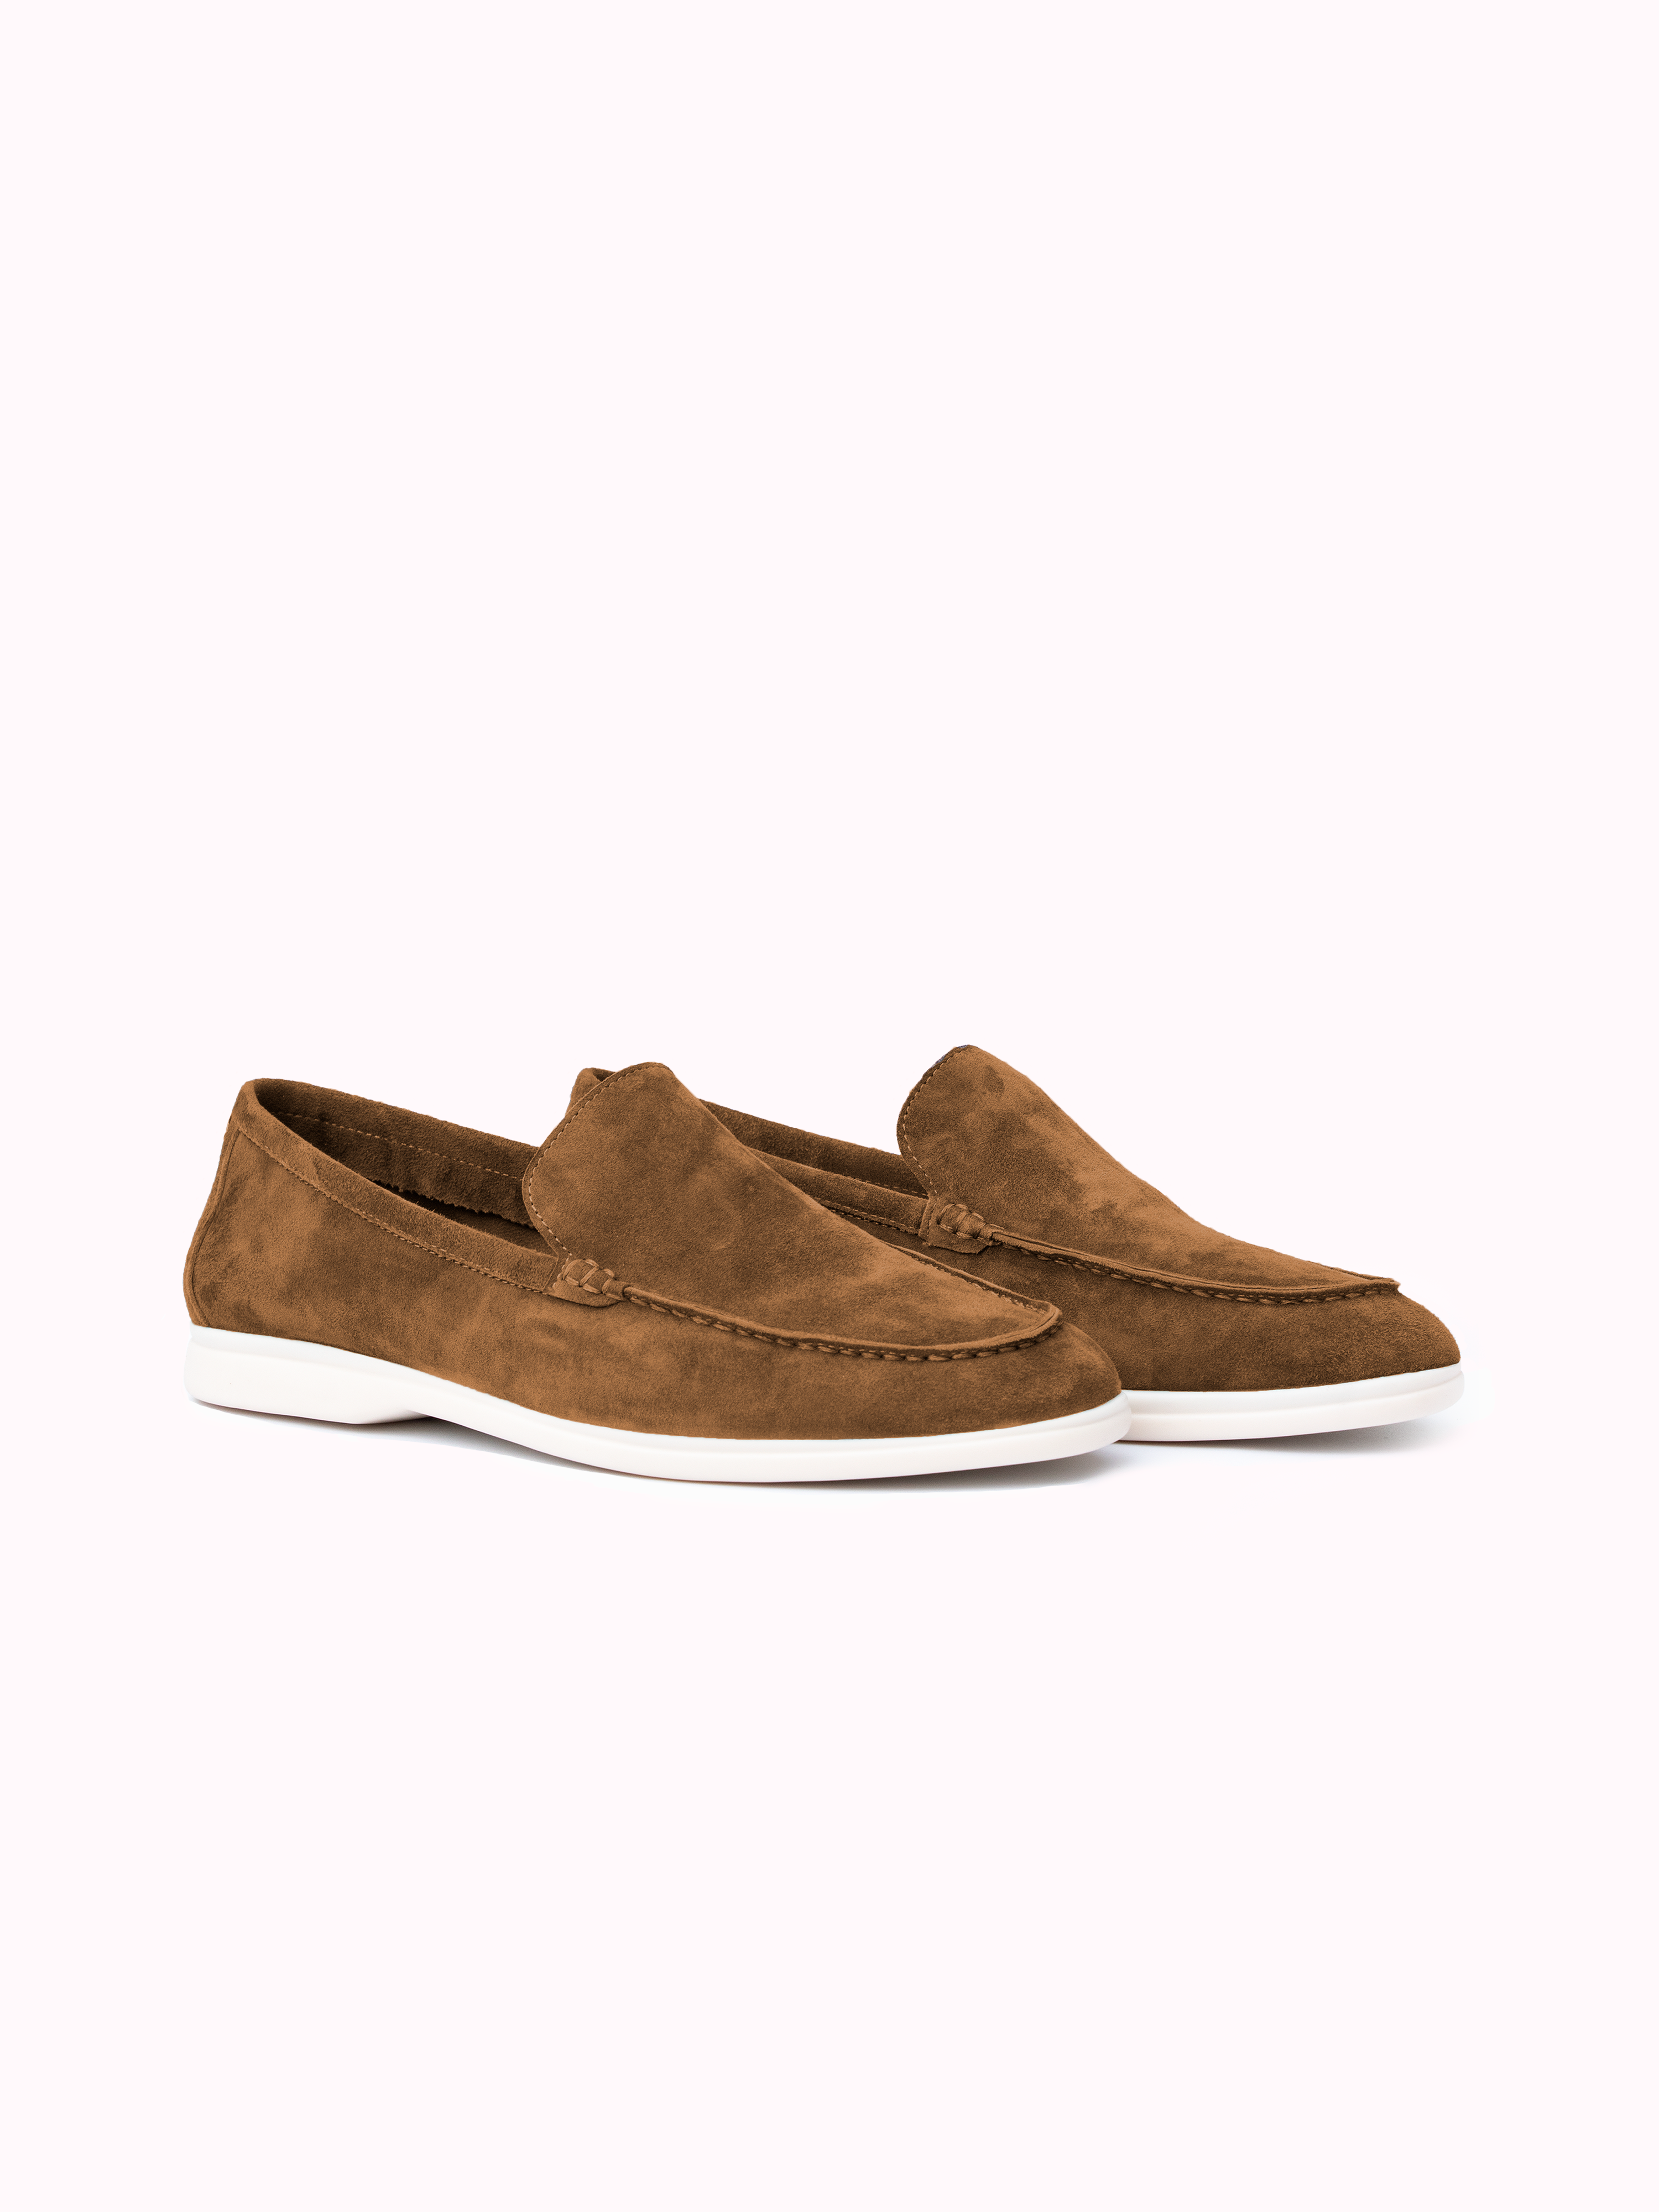 Marina Suede Loafers - Brown